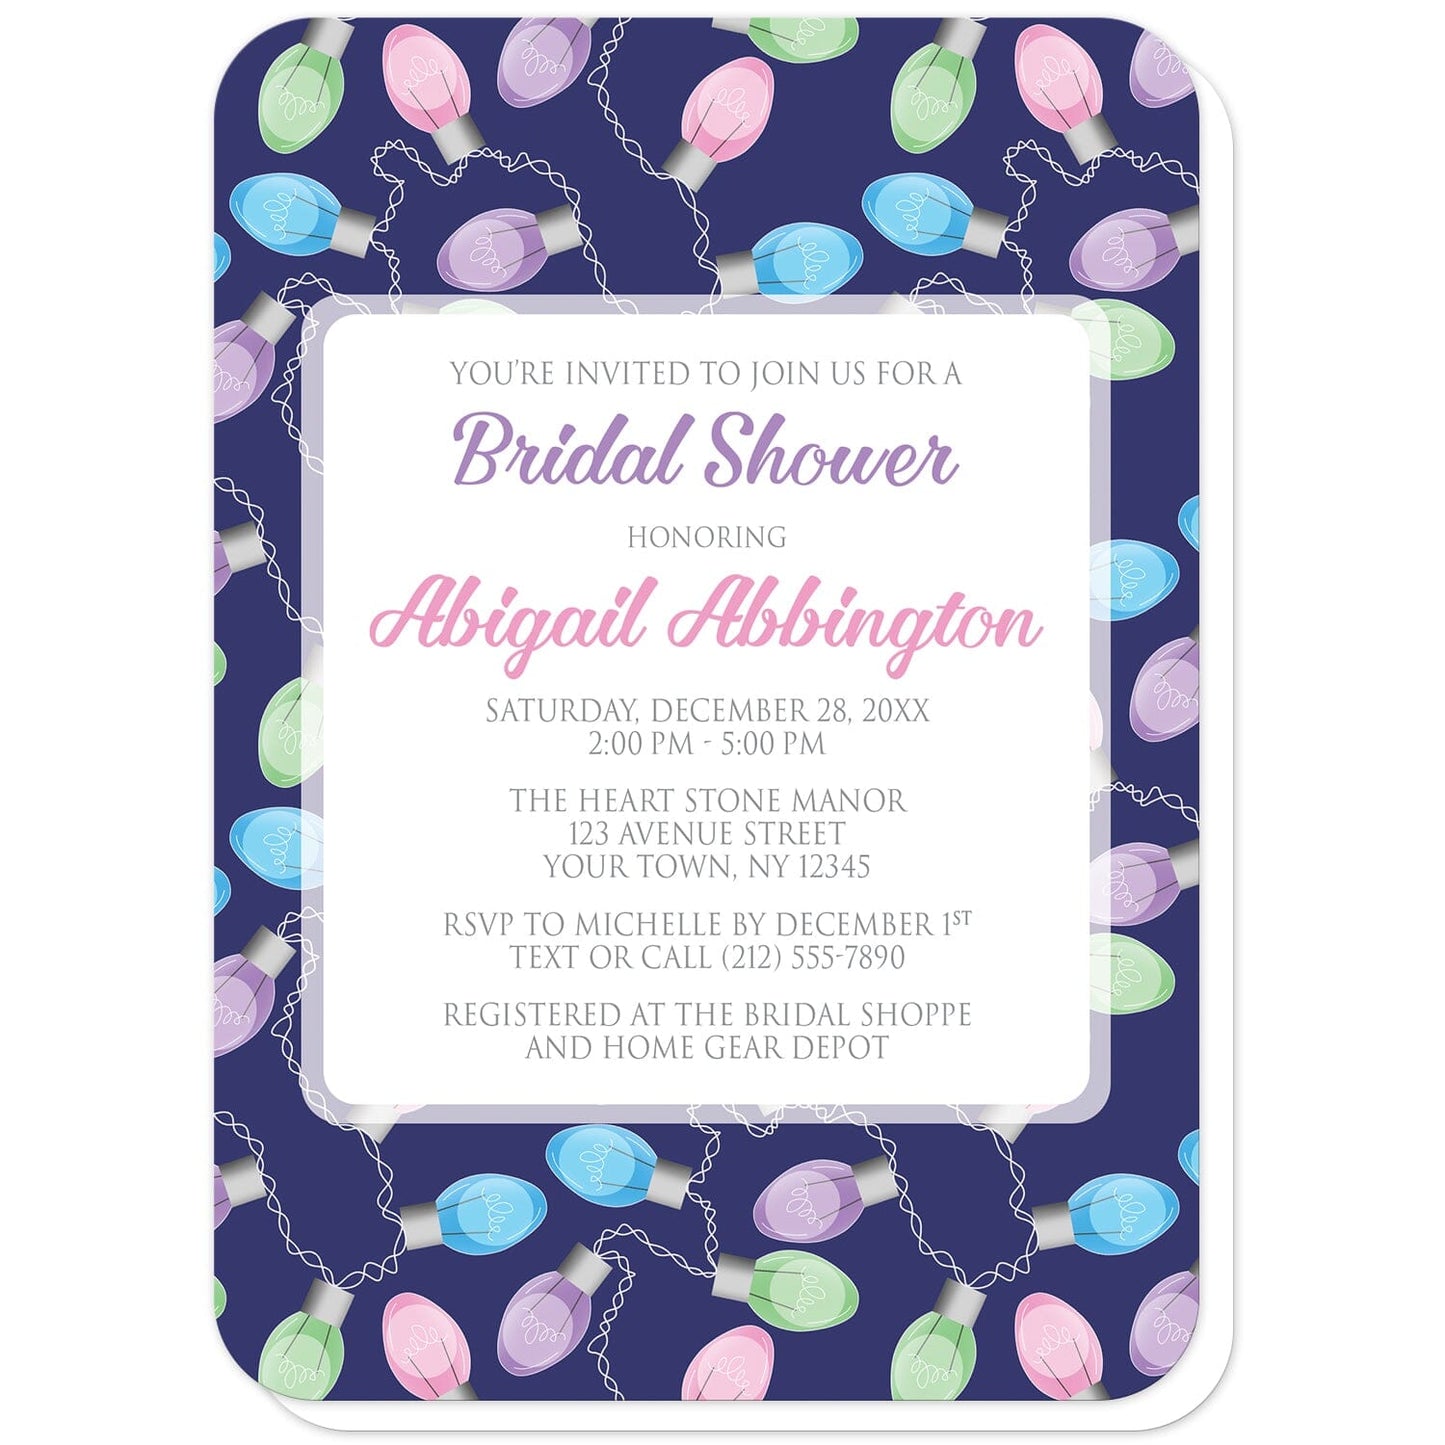 Holiday Lights Pattern Bridal Shower Invitations (with rounded corners) at Artistically Invited. Holiday lights pattern bridal shower invitations designed with your personalized celebration details custom printed in purple, pink, and gray in a white square frame design over a background illustrated with a string of colorful holiday lights in a pattern over a navy blue color. The bulb colors on the string in the design are pink, purple, blue, and green.